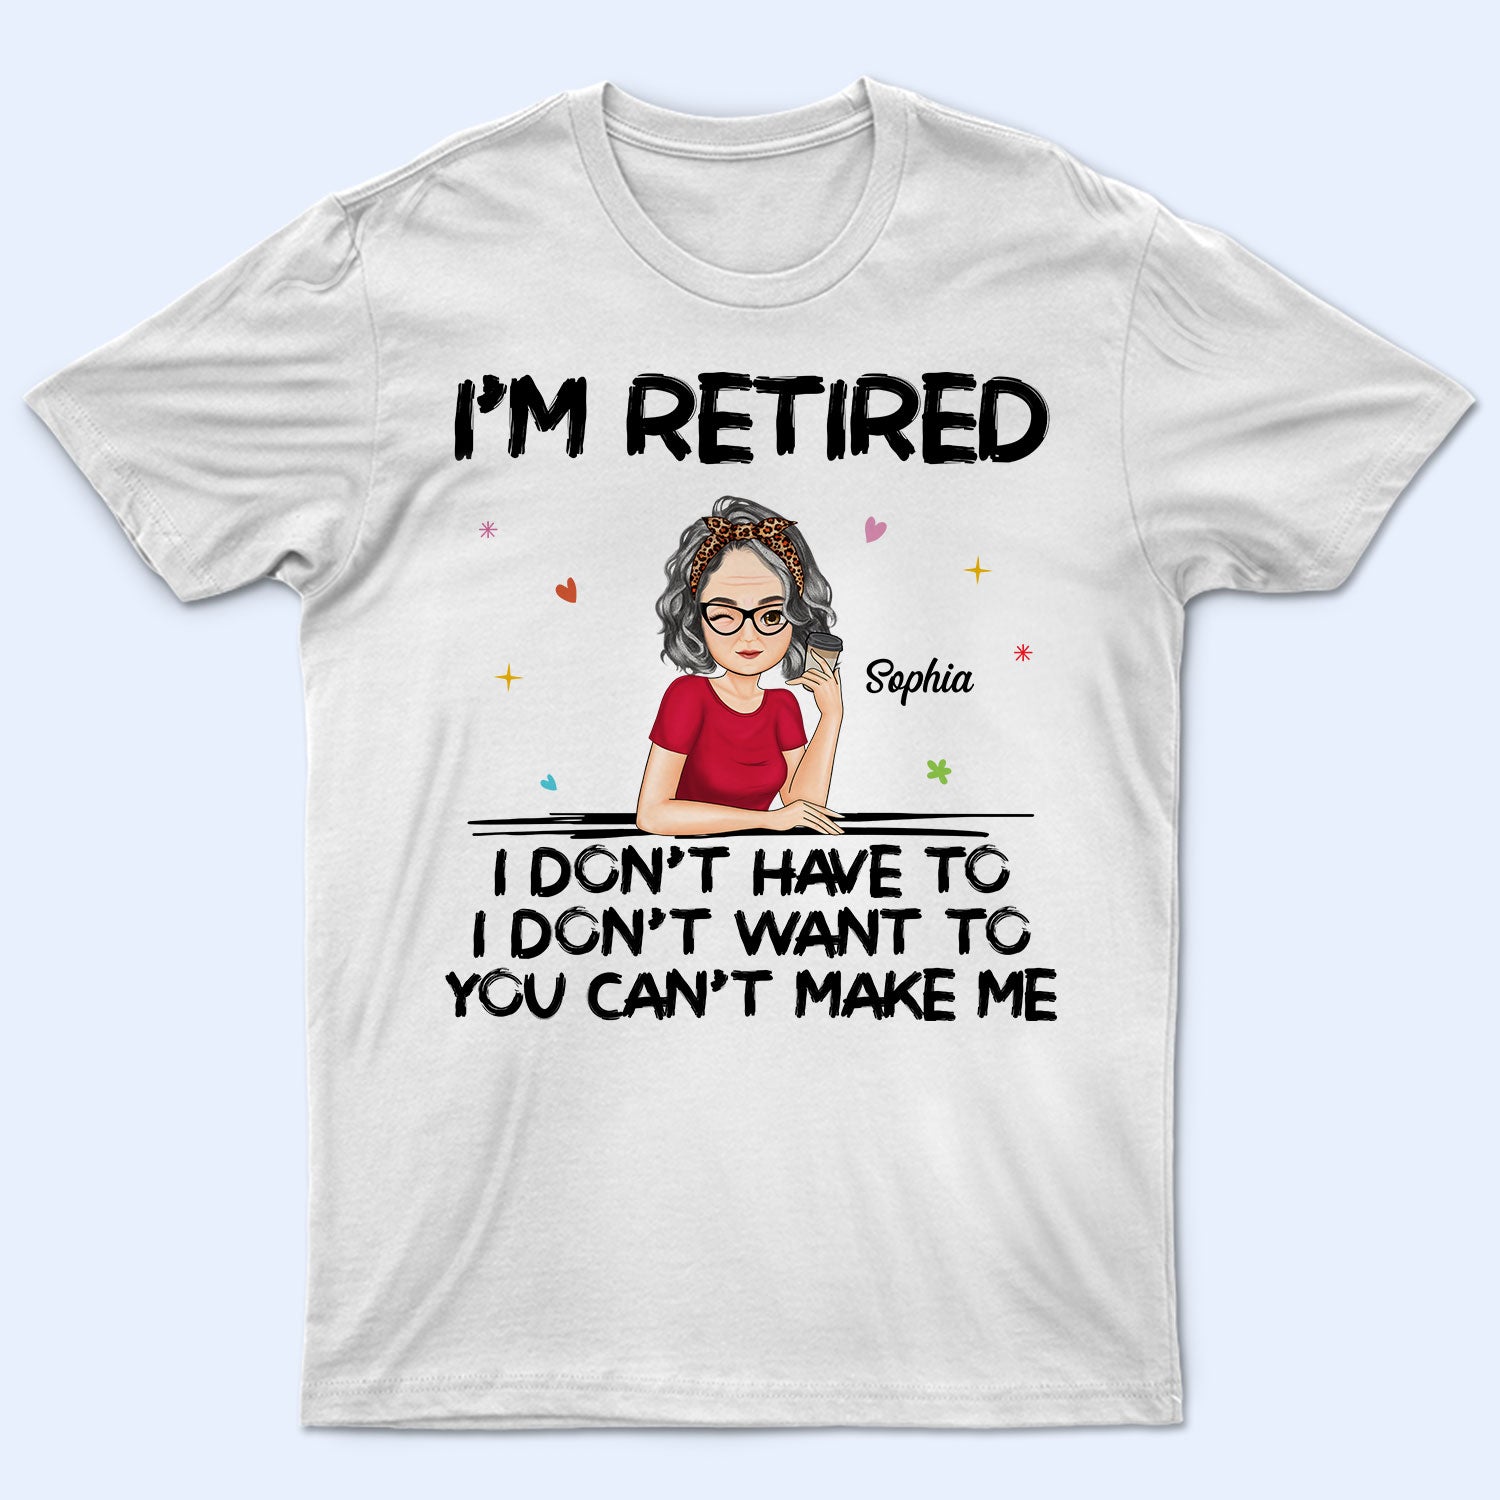 I'm Retired You Can't Make Me - Retirement Gift For Mother, Grandma, Grandmother - Personalized T Shirt